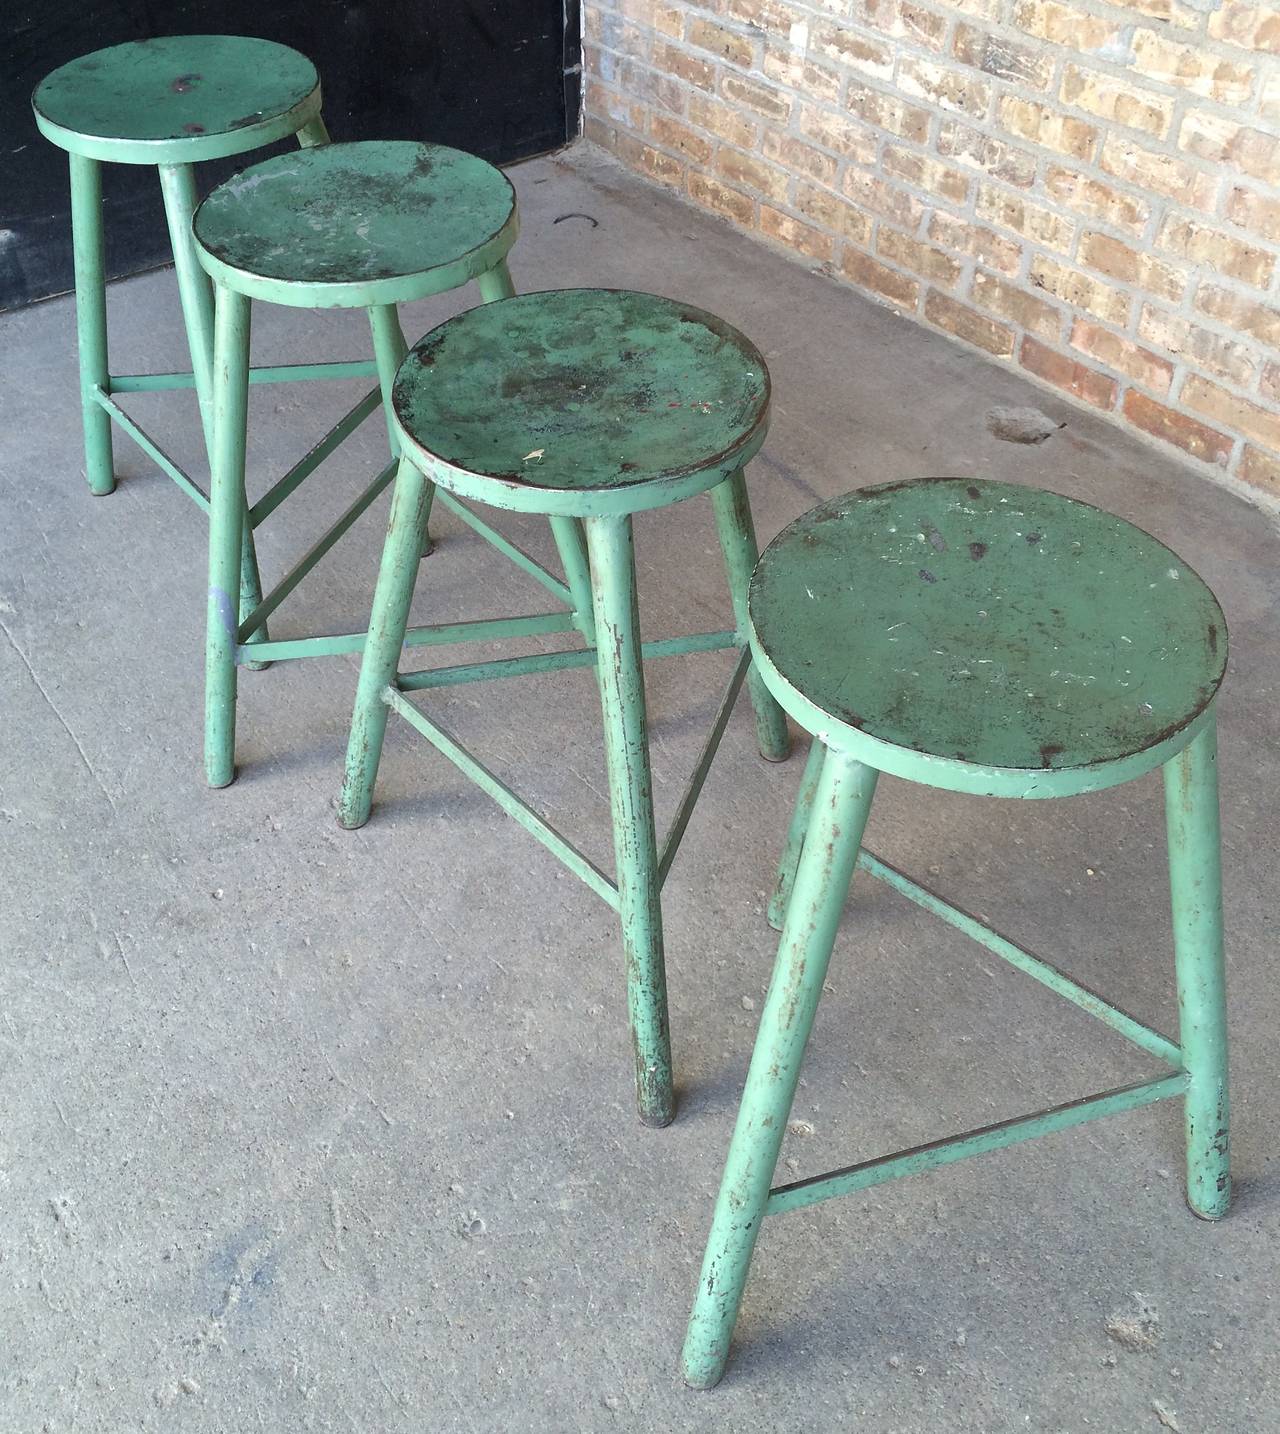 Painted Vintage Industrial Metal Stools with Original Paint For Sale